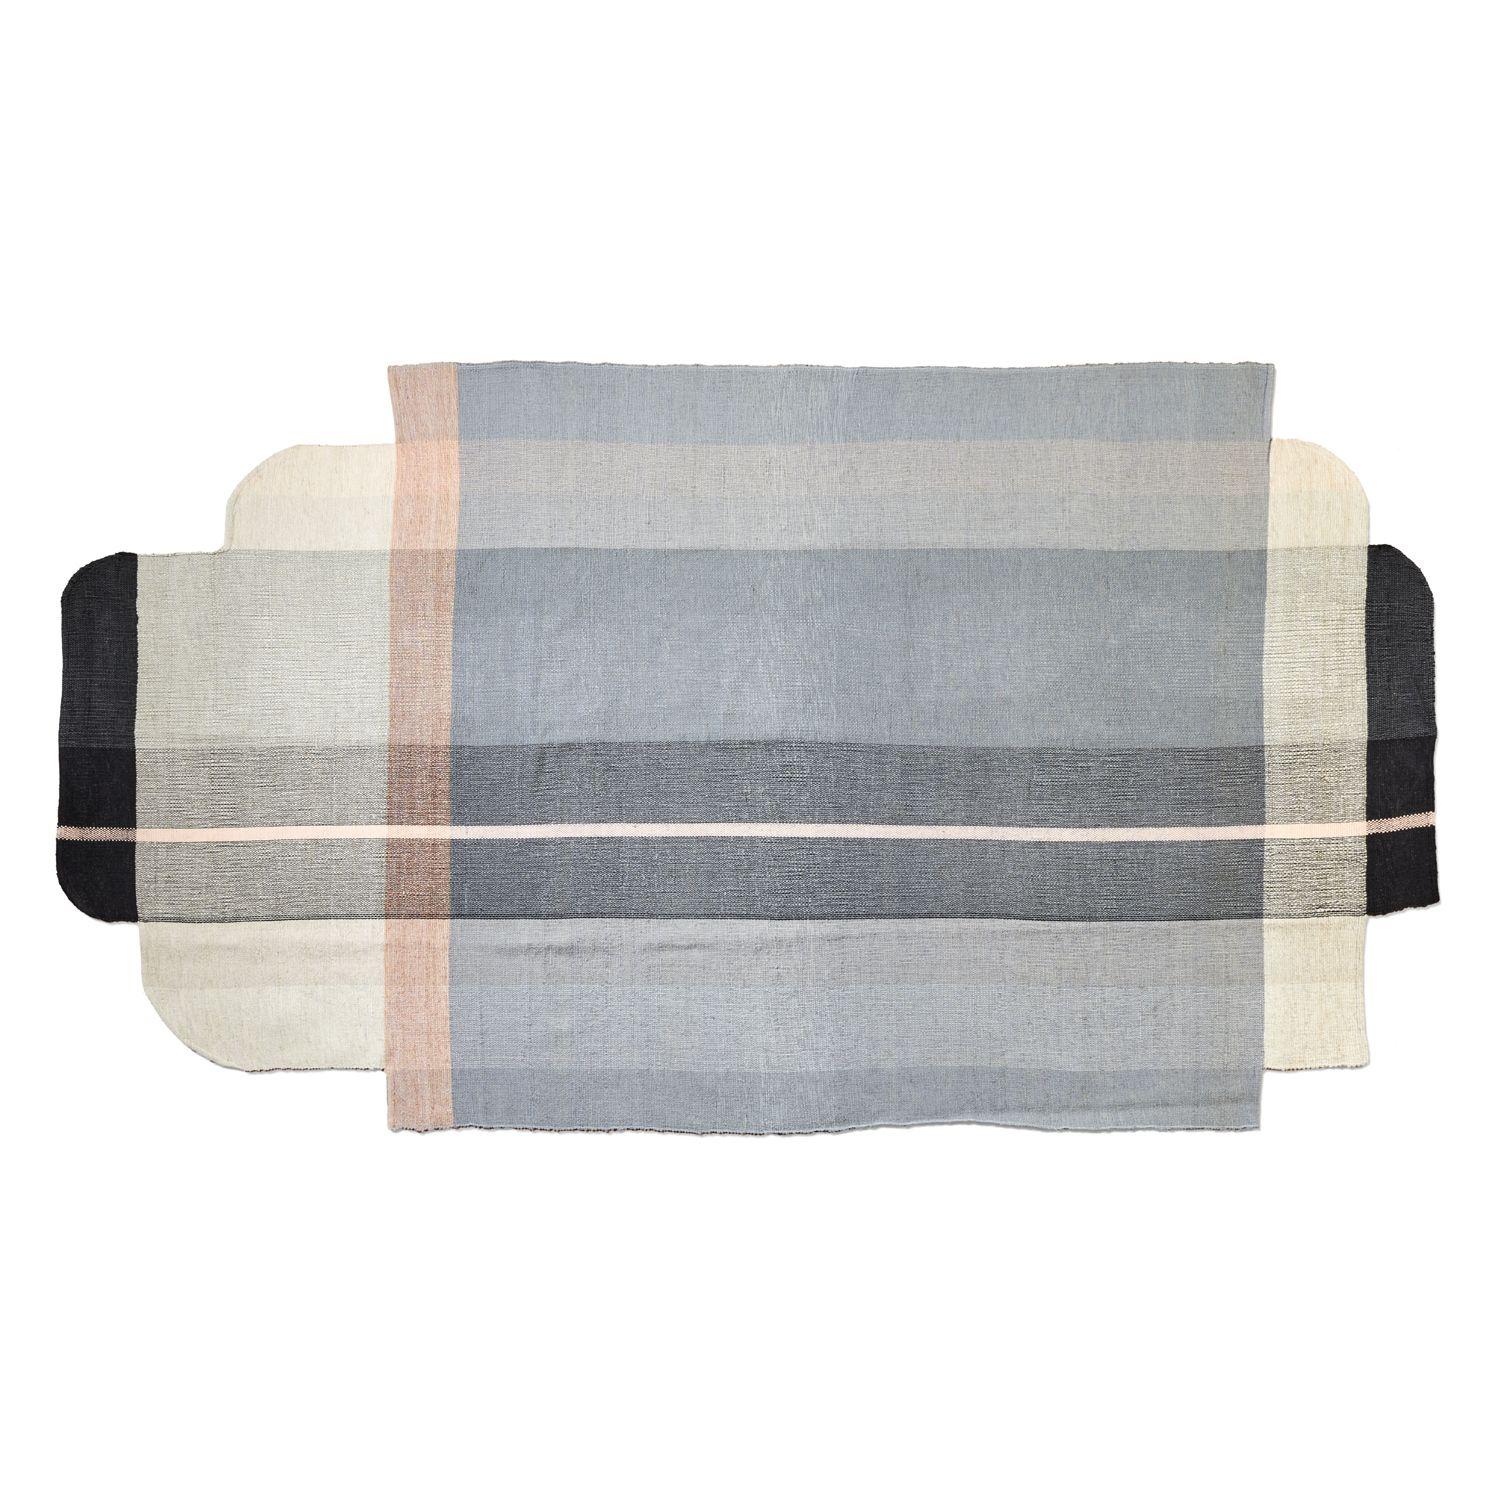 Large muyska rug by Mae Engelgeer
Materials: 100% natural virgin wool
Technique: Hand-woven in Colombia.
Dimensions: W 190 x L 365 cm 
Available in colors: grey/beige/black, grey/purple/light blue, light blue/grey/dark blue. Available in other